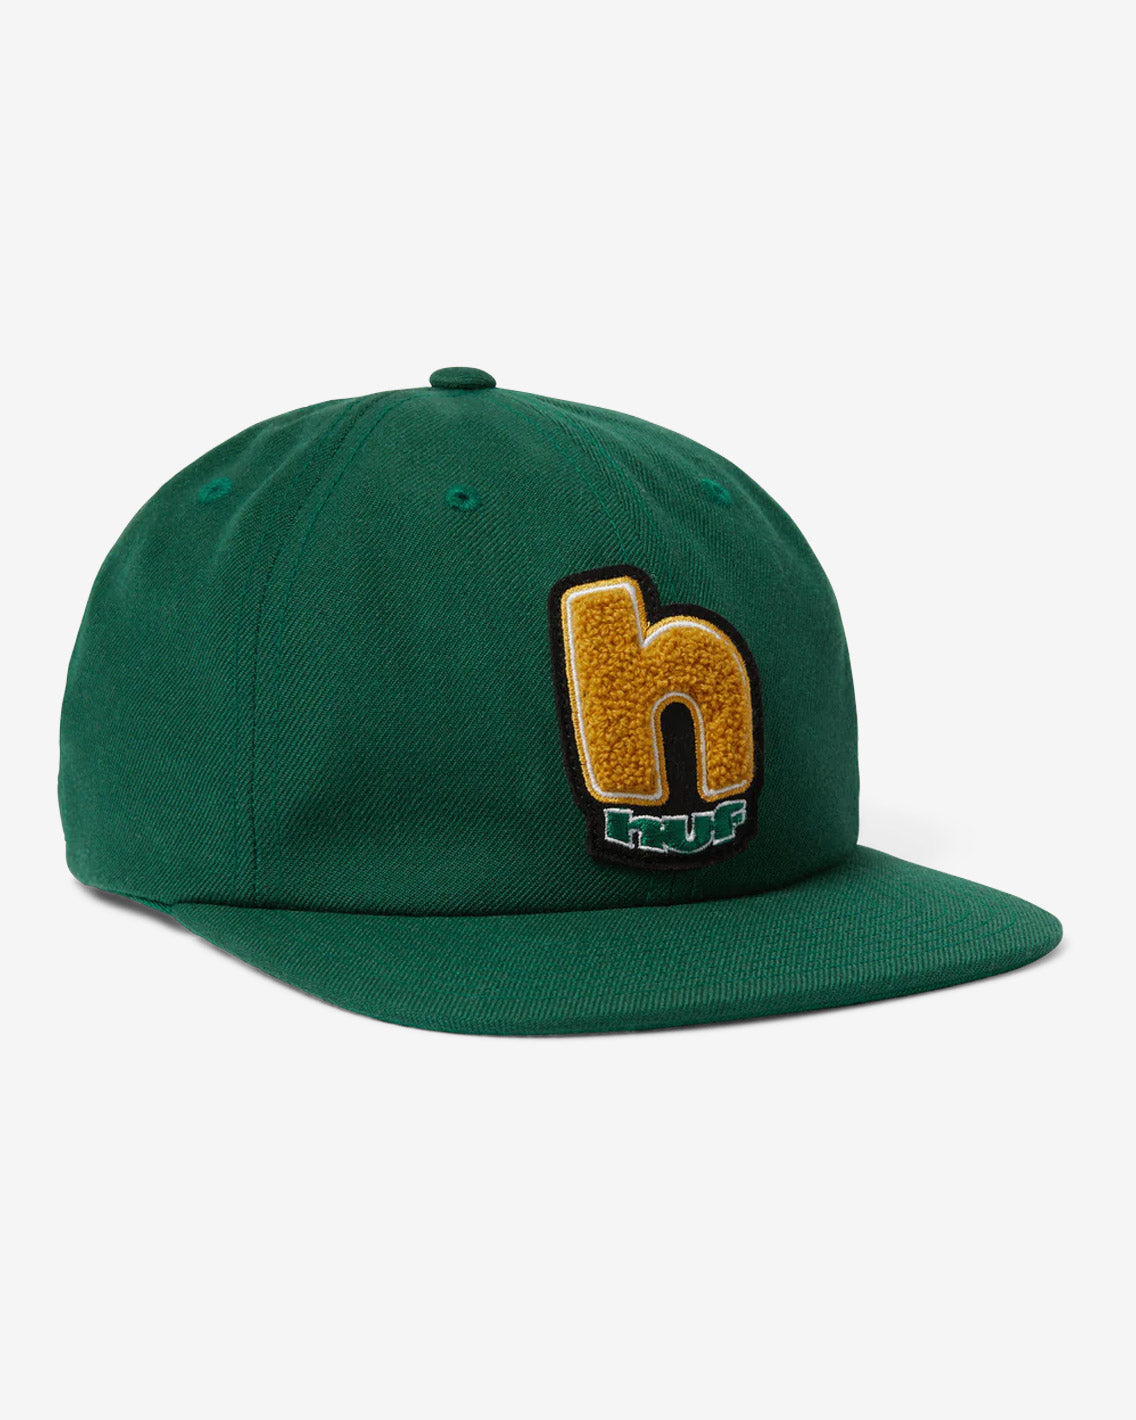 HUF - Moab H 6 Panel Hat - Forest Green